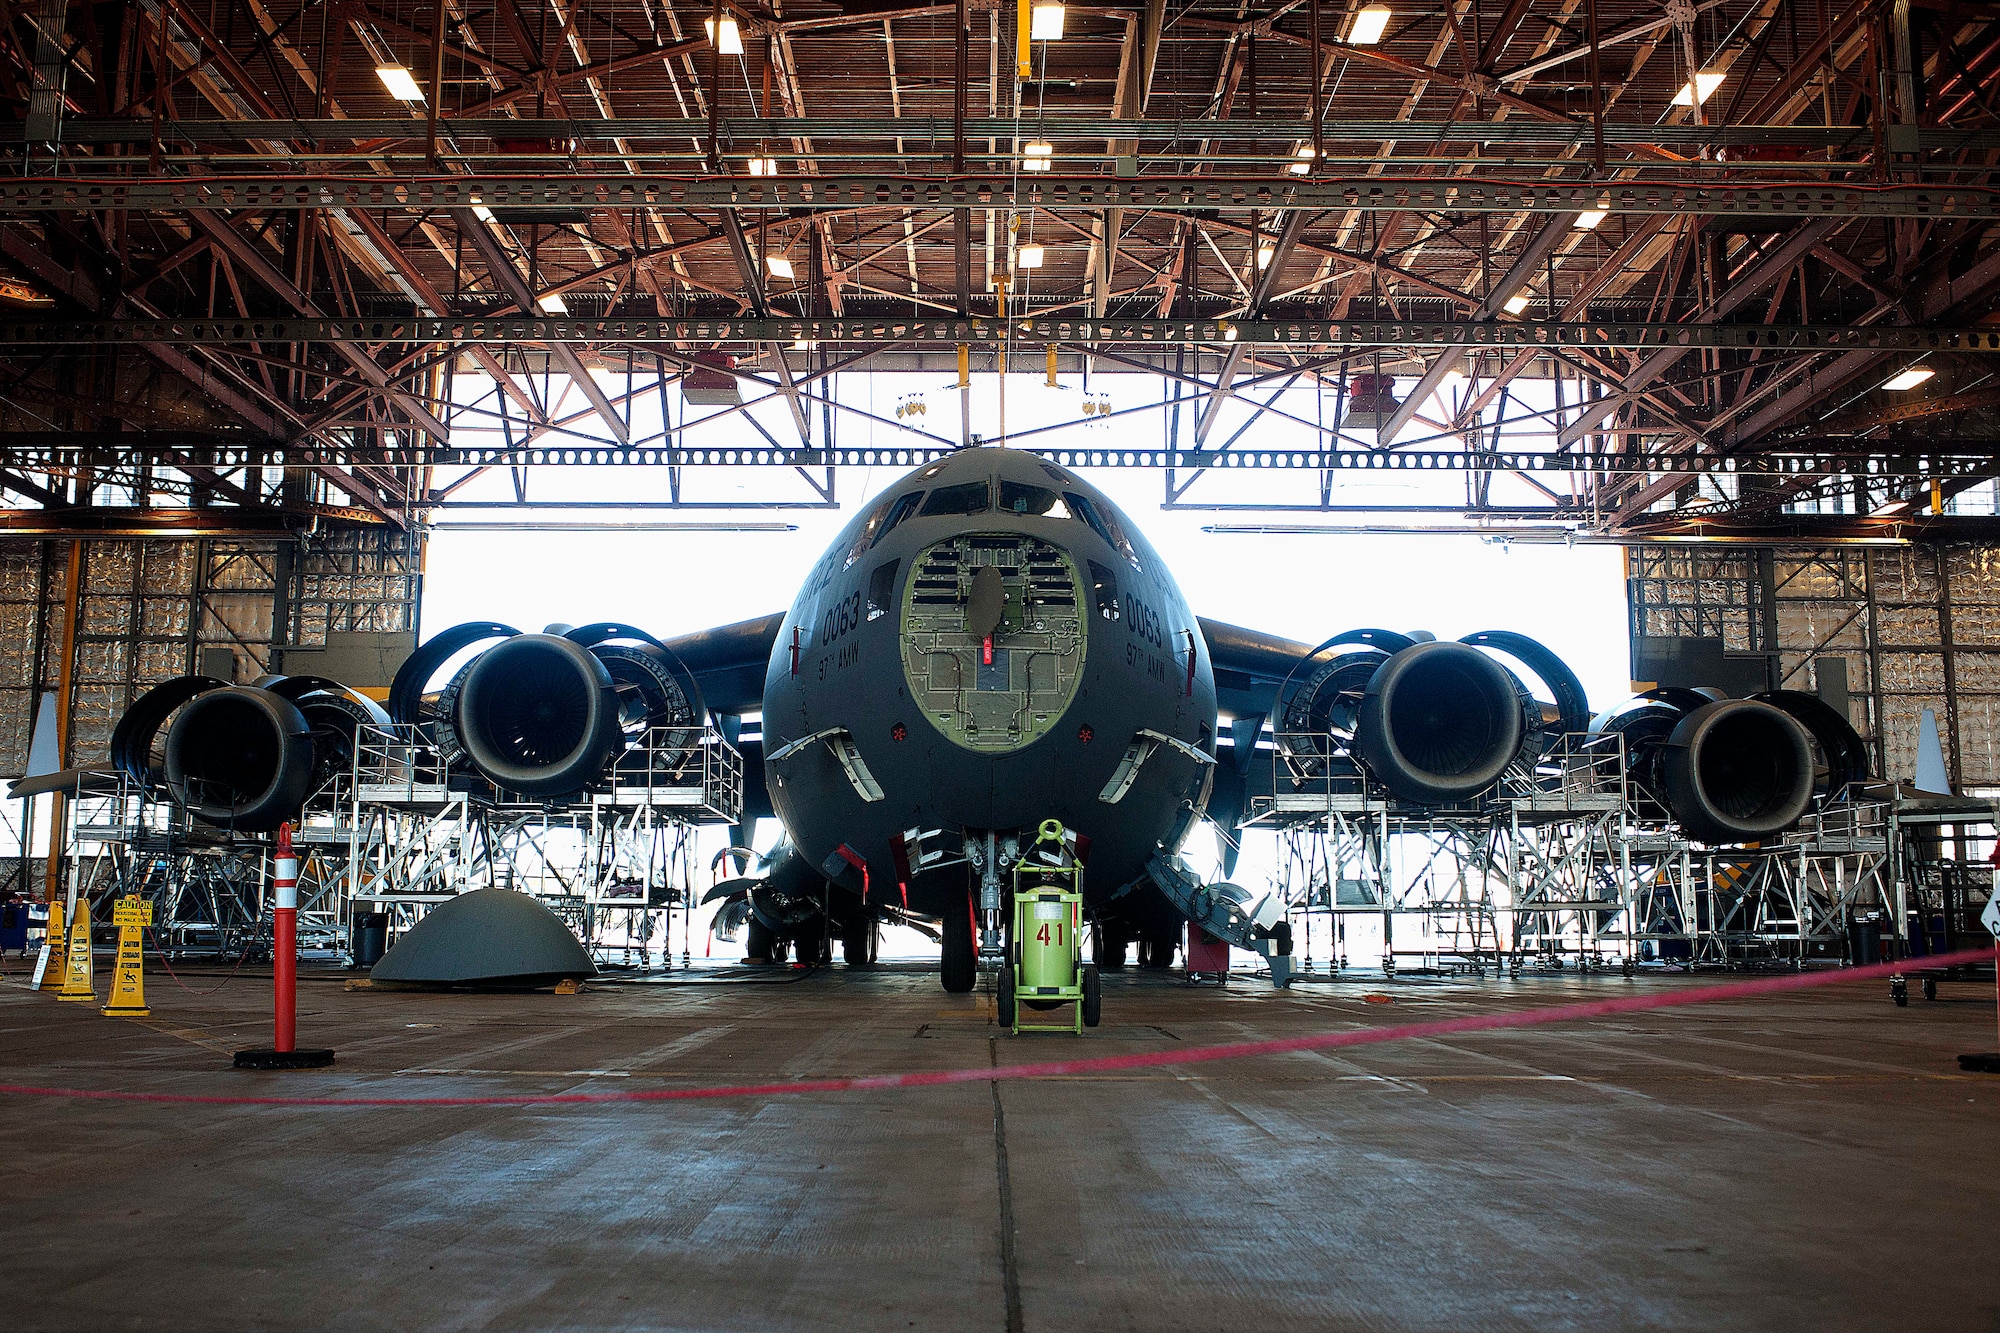 ALTUS AIR FORCE BASE, Okla. – A C-17 Globemaster III cargo aircraft sits dismantled in a hangar during a 720-day home station refurbishing Oct. 10, 2013. The 97th Air Mobility Wing Maintenance Division A-Team periodically performs this inspection to certify its operational maintenance and serviceability, garnering a mission proficient aircraft. (U.S. Air Force photo by Senior Airman Jesse Lopez/Released)